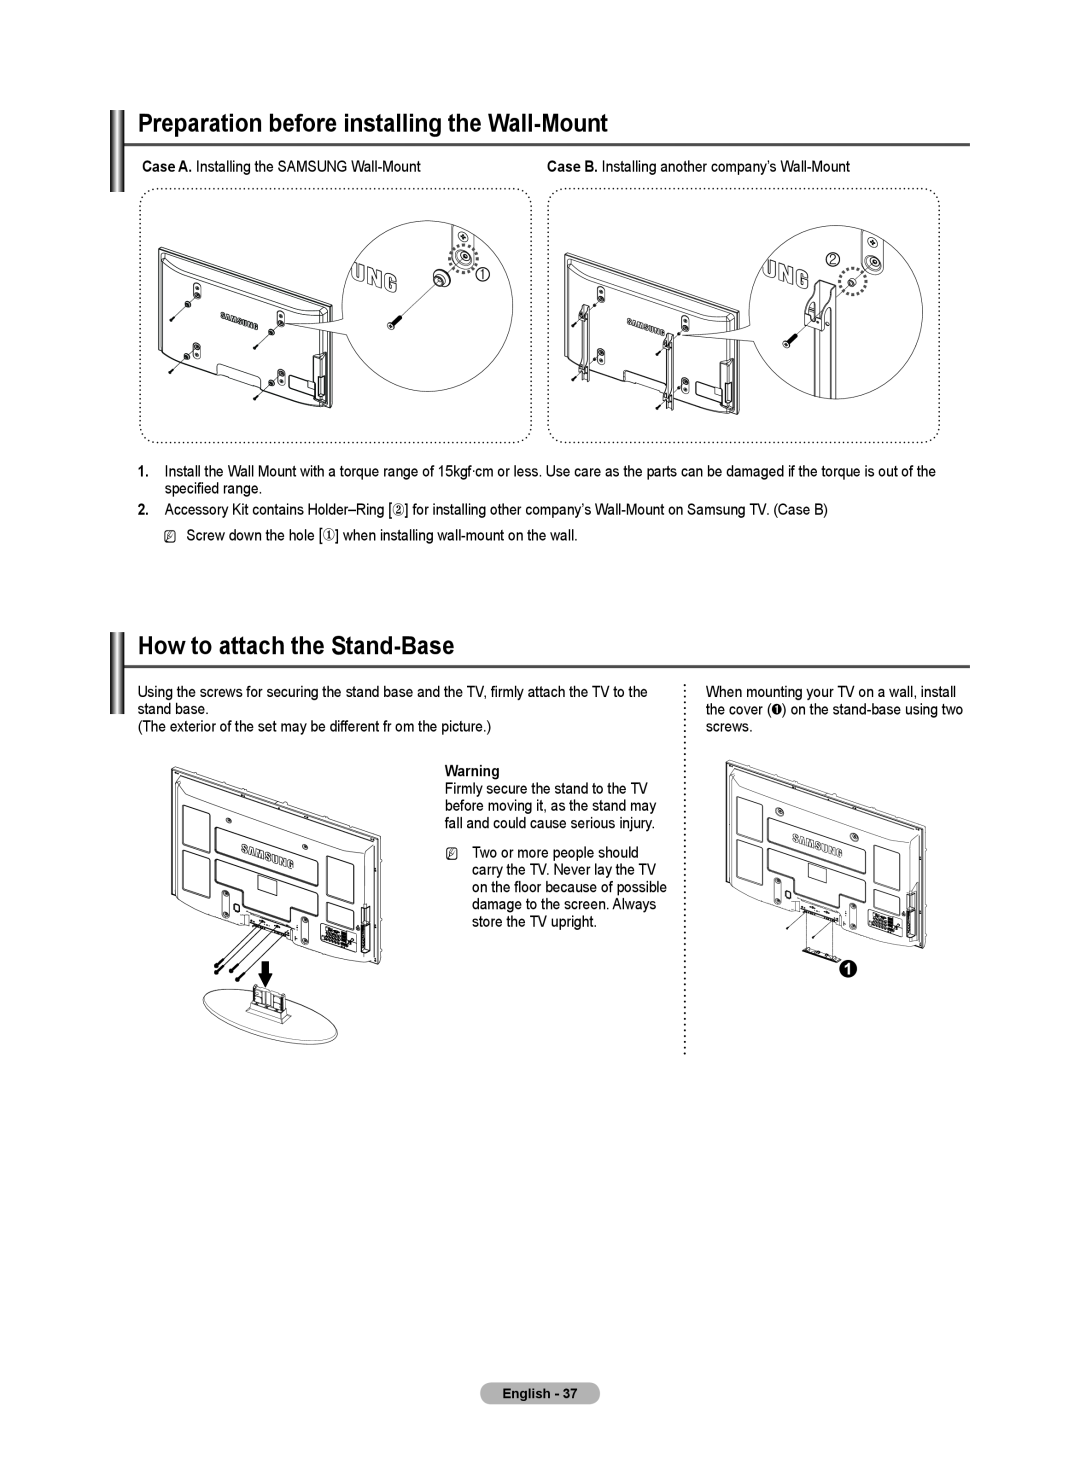 Samsung BN68-02426A-00 user manual Preparation before installing the Wall-Mount, How to attach the Stand-Base 